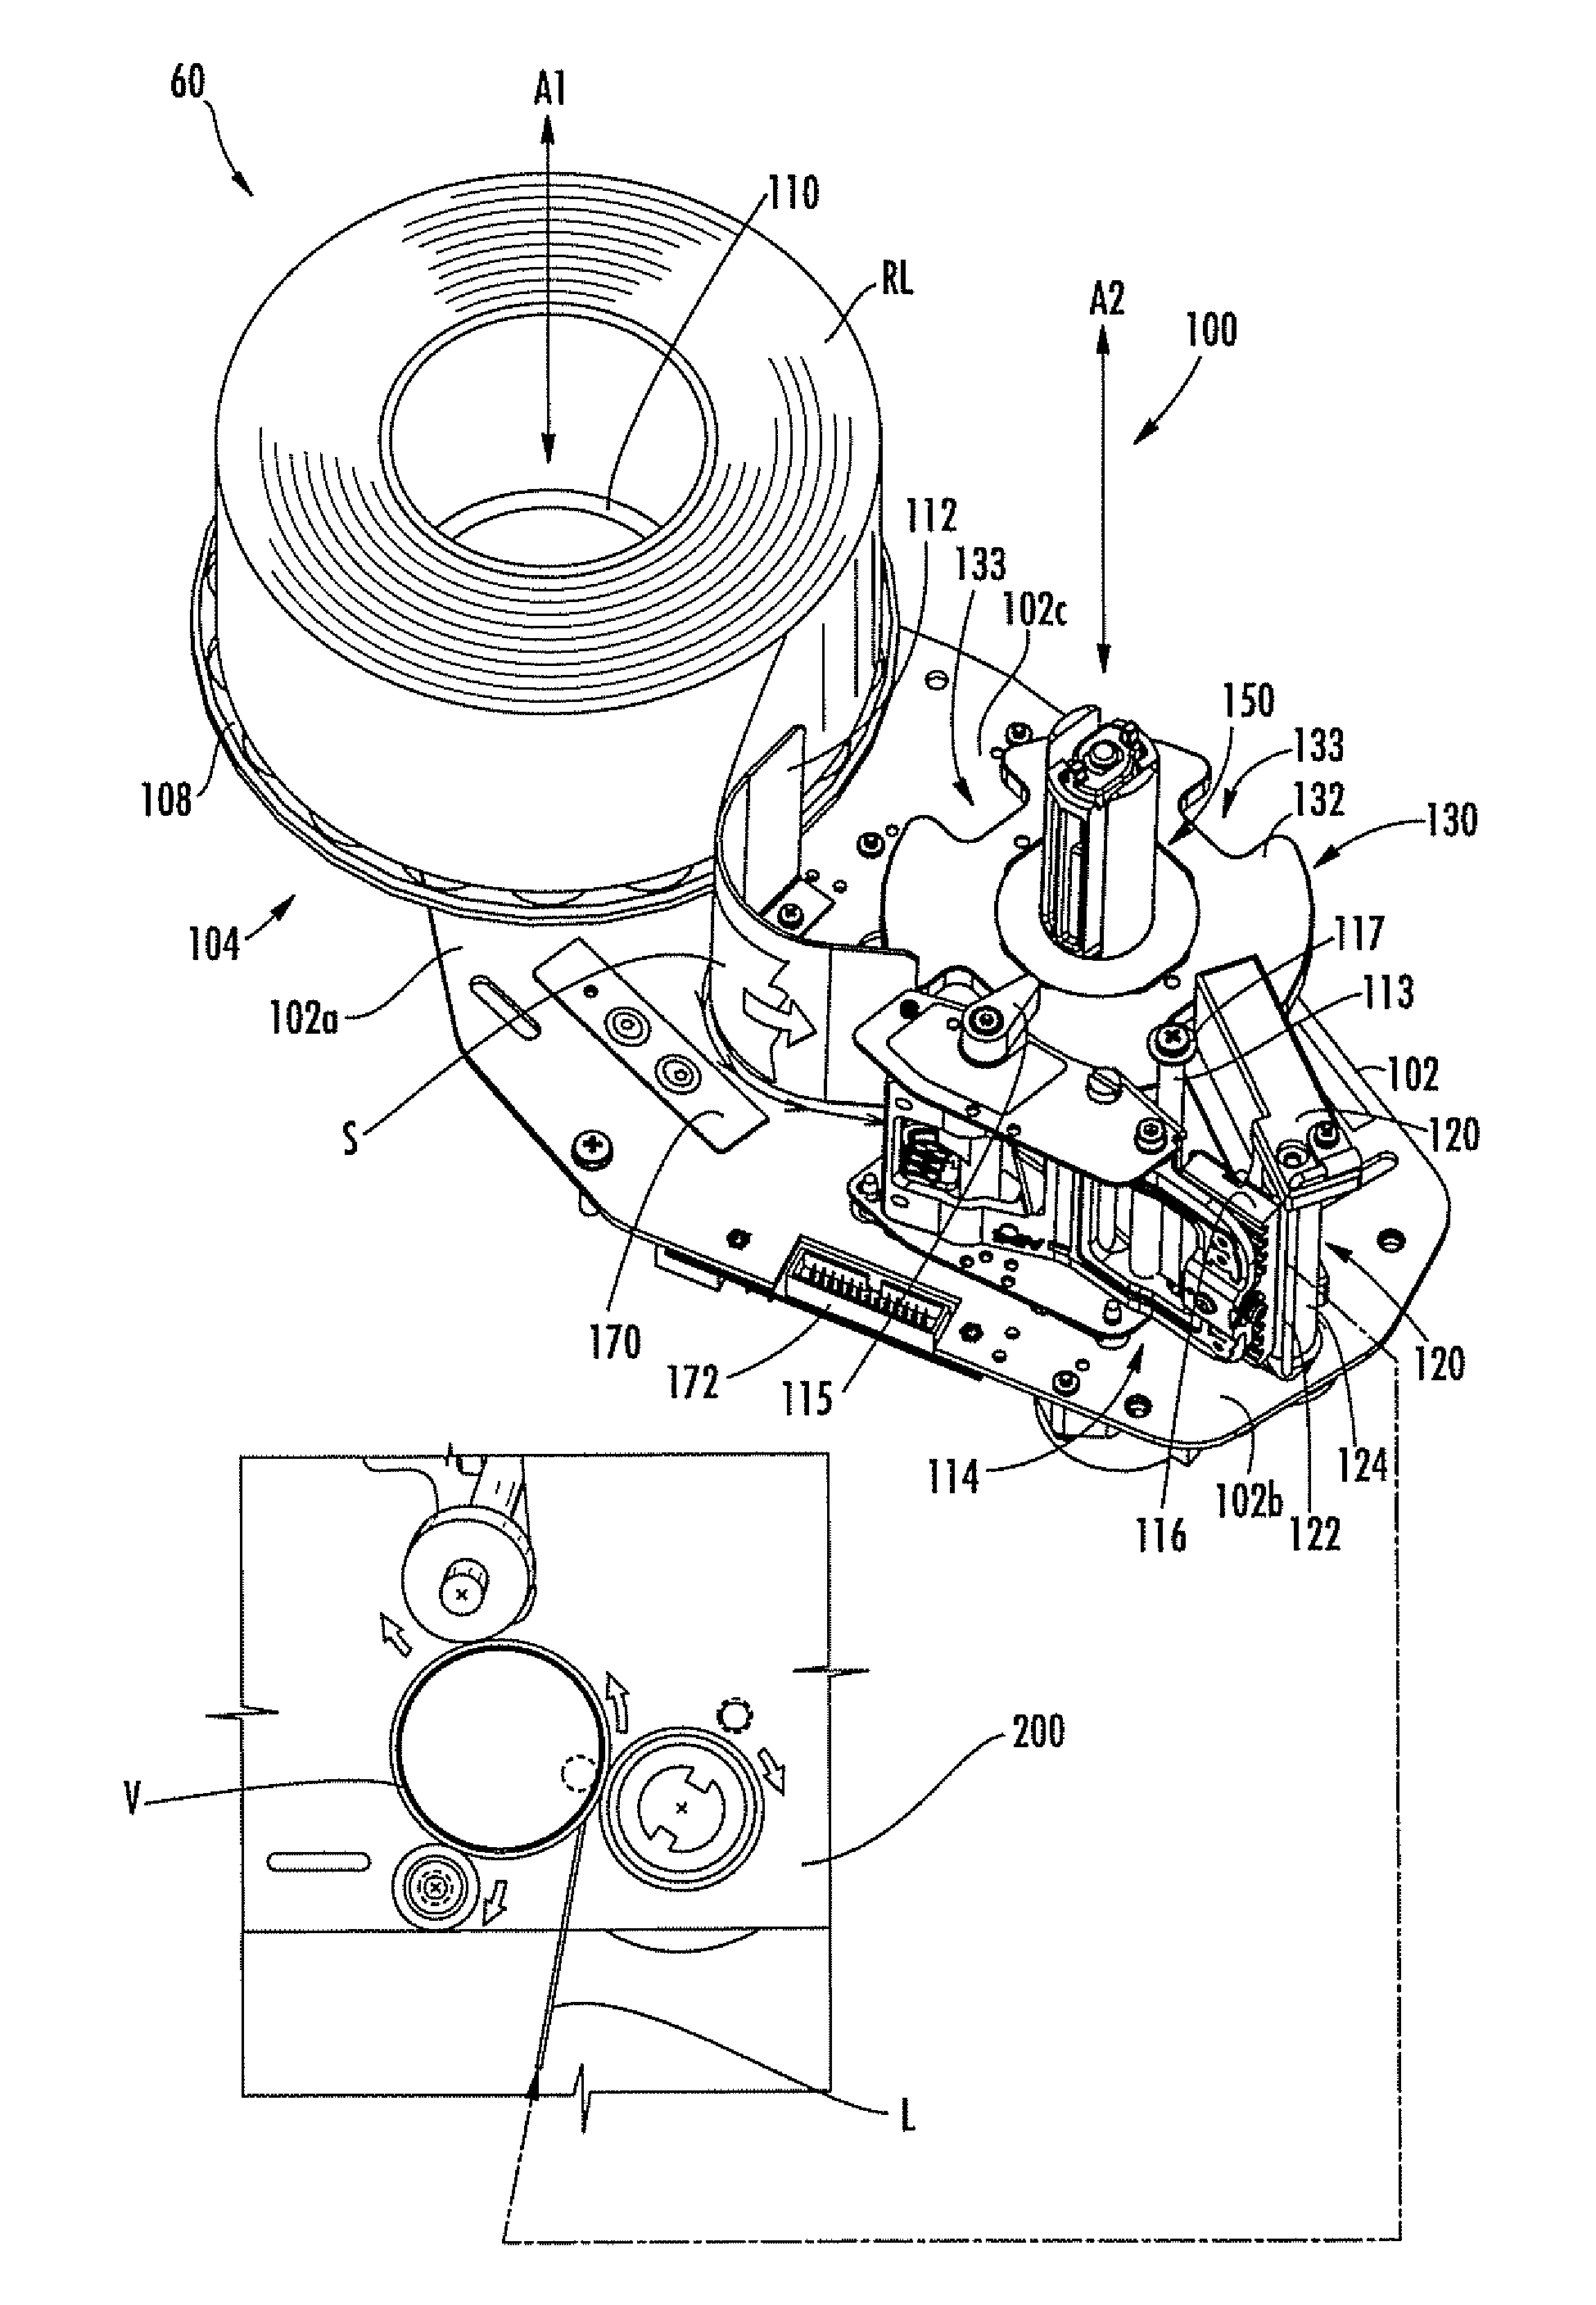 Device and Method for Printing Labels